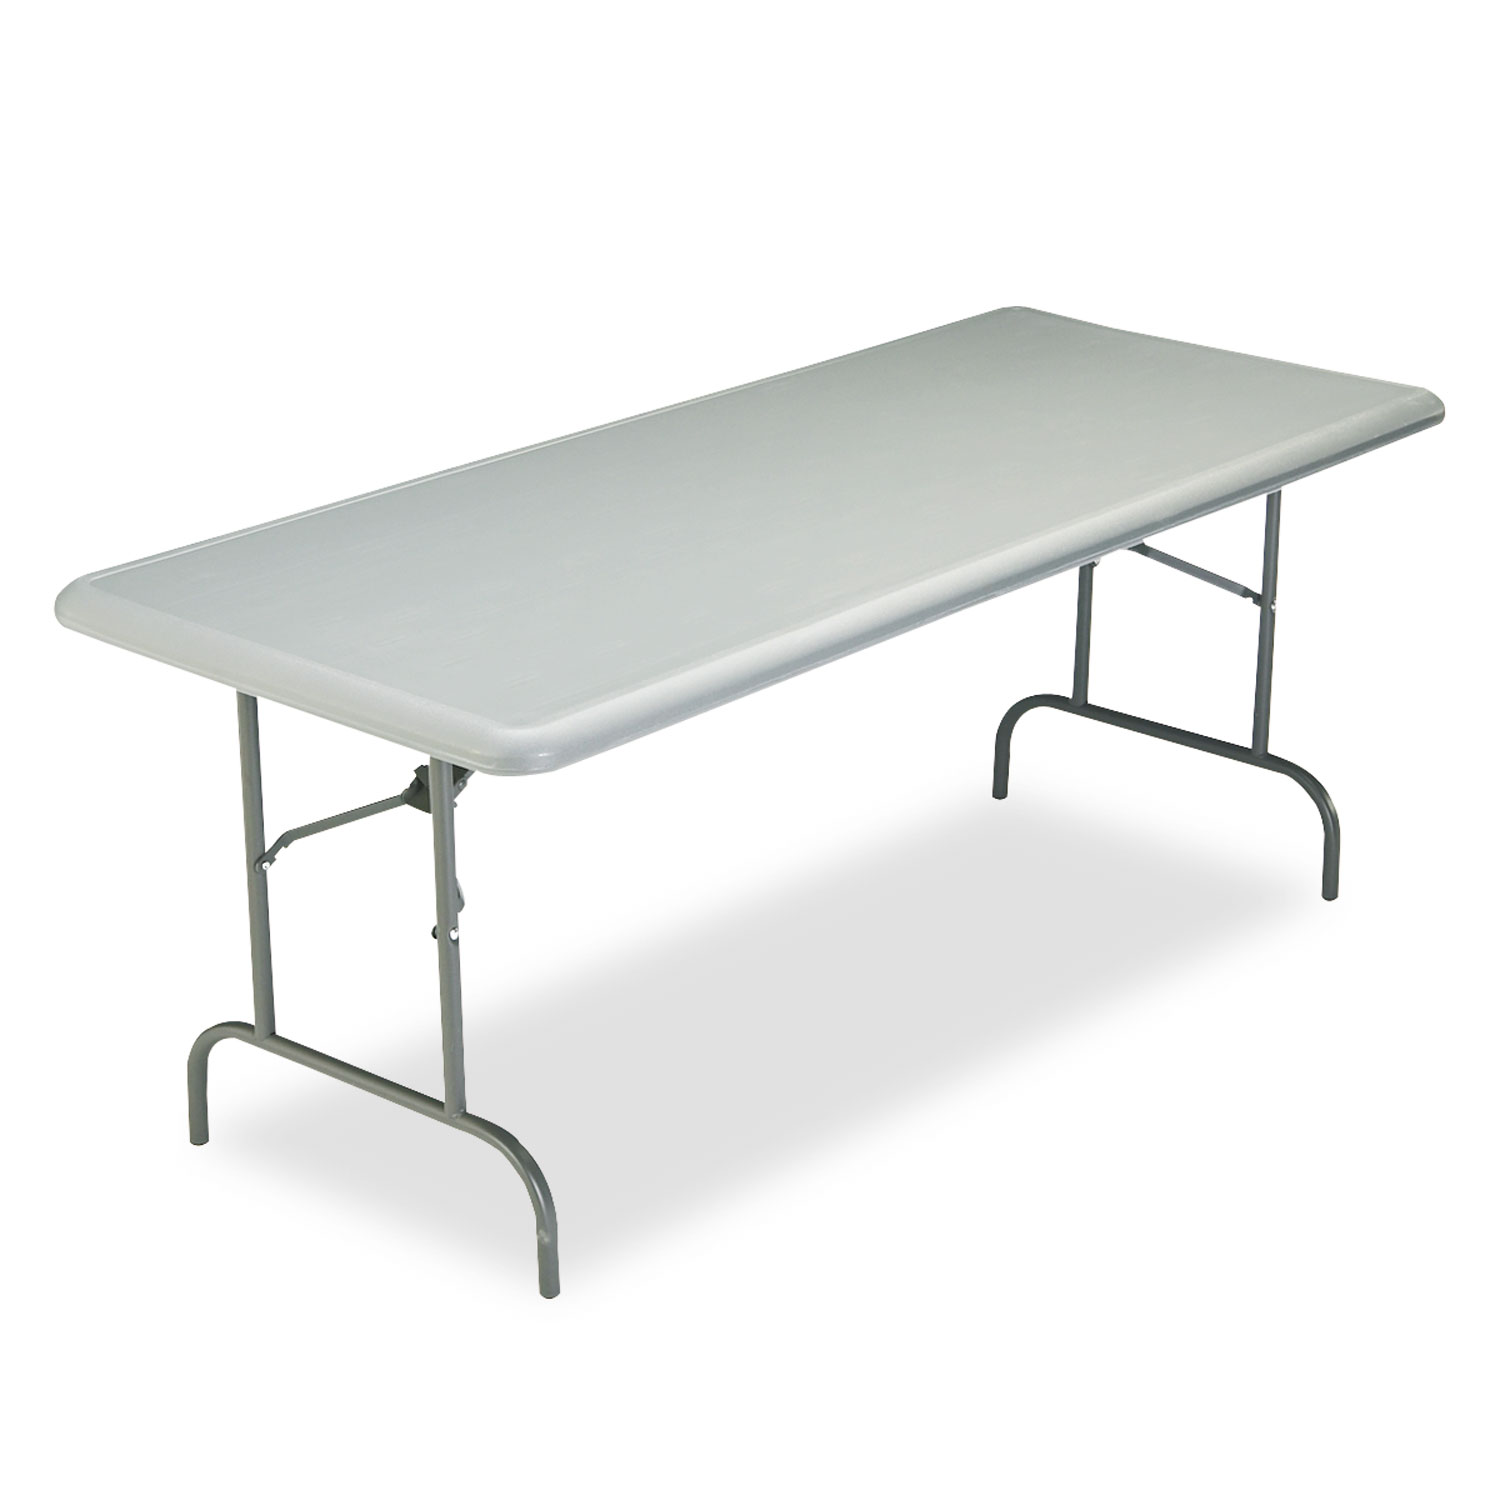 Iceberg ICE65227 IndestrucTables Too 1200 Series Resin Folding Table, 72w x 30d x 29h, Charcoal